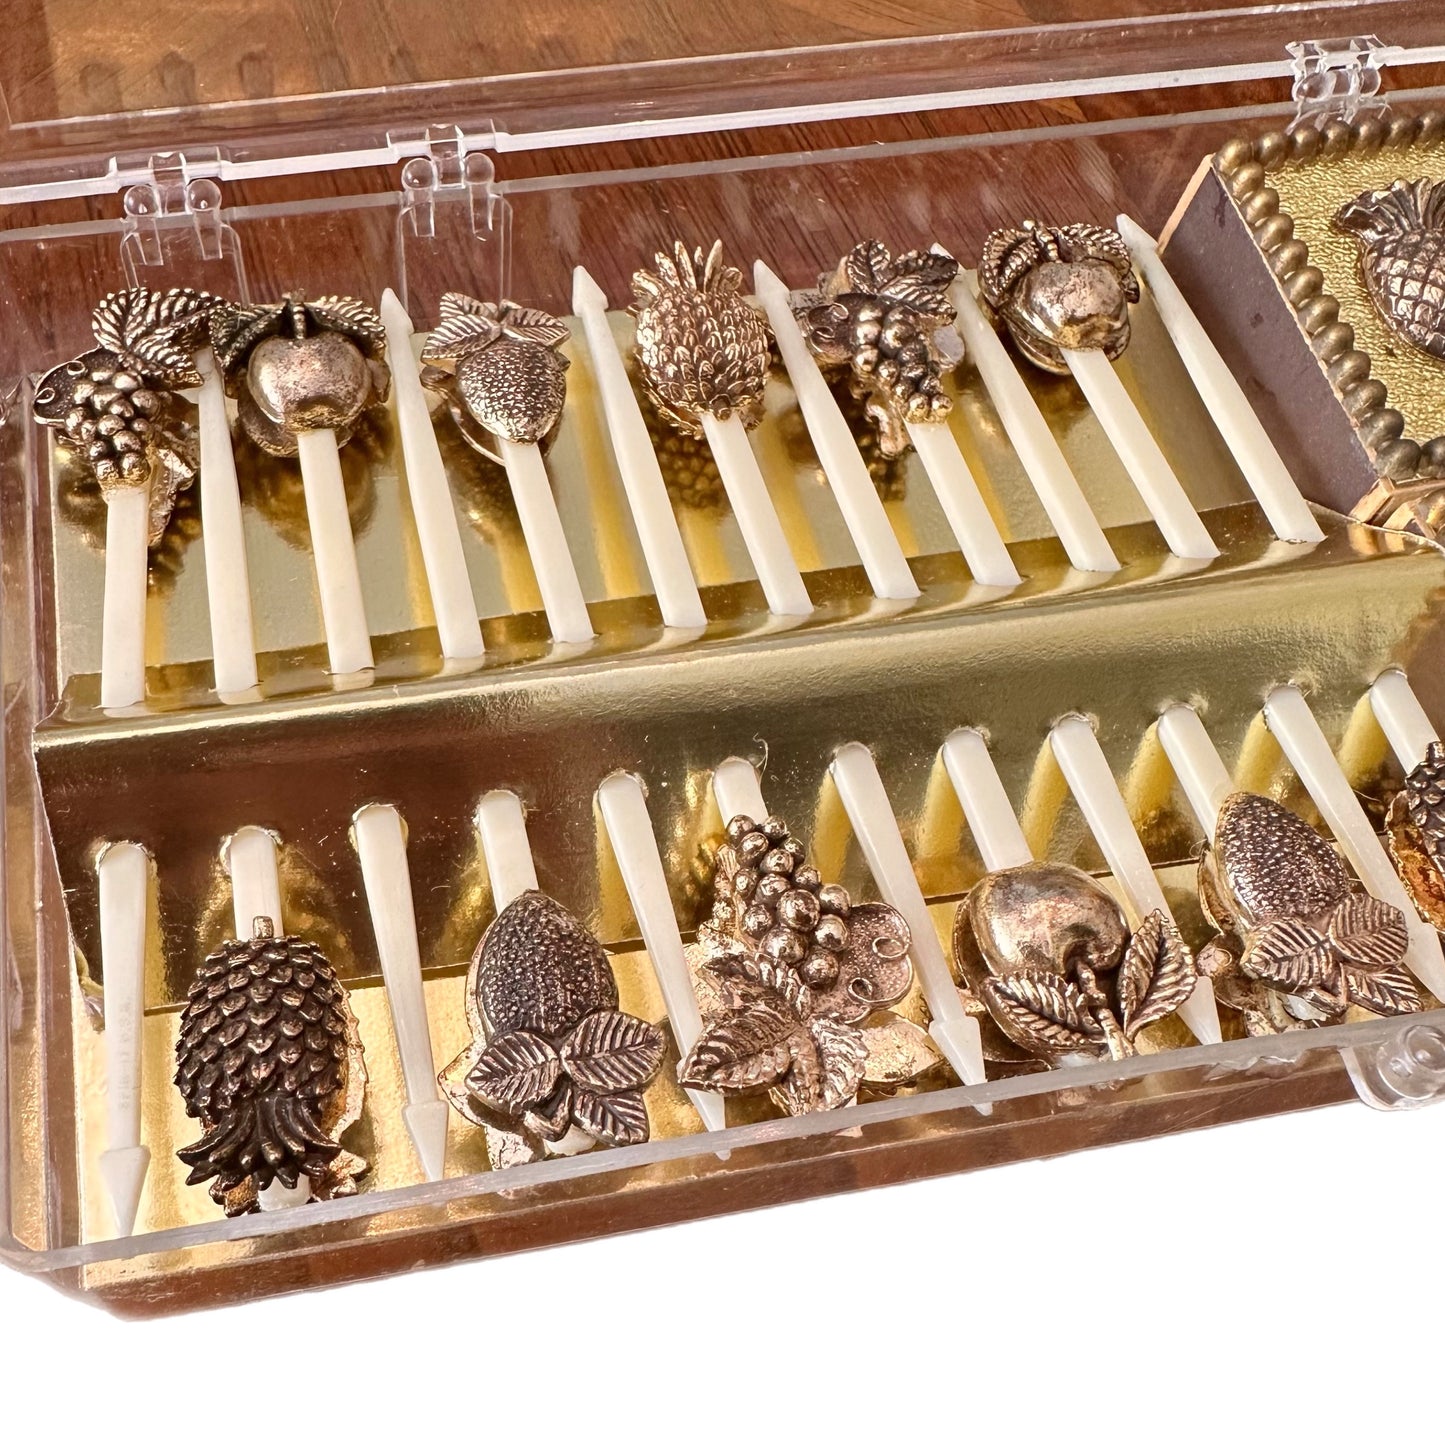 MID CENTURY BARWARE COCKTAIL PICKS SET OF 12 with 4 matchboxes Fruit Design 'Stir-it USA' Appetizers parties